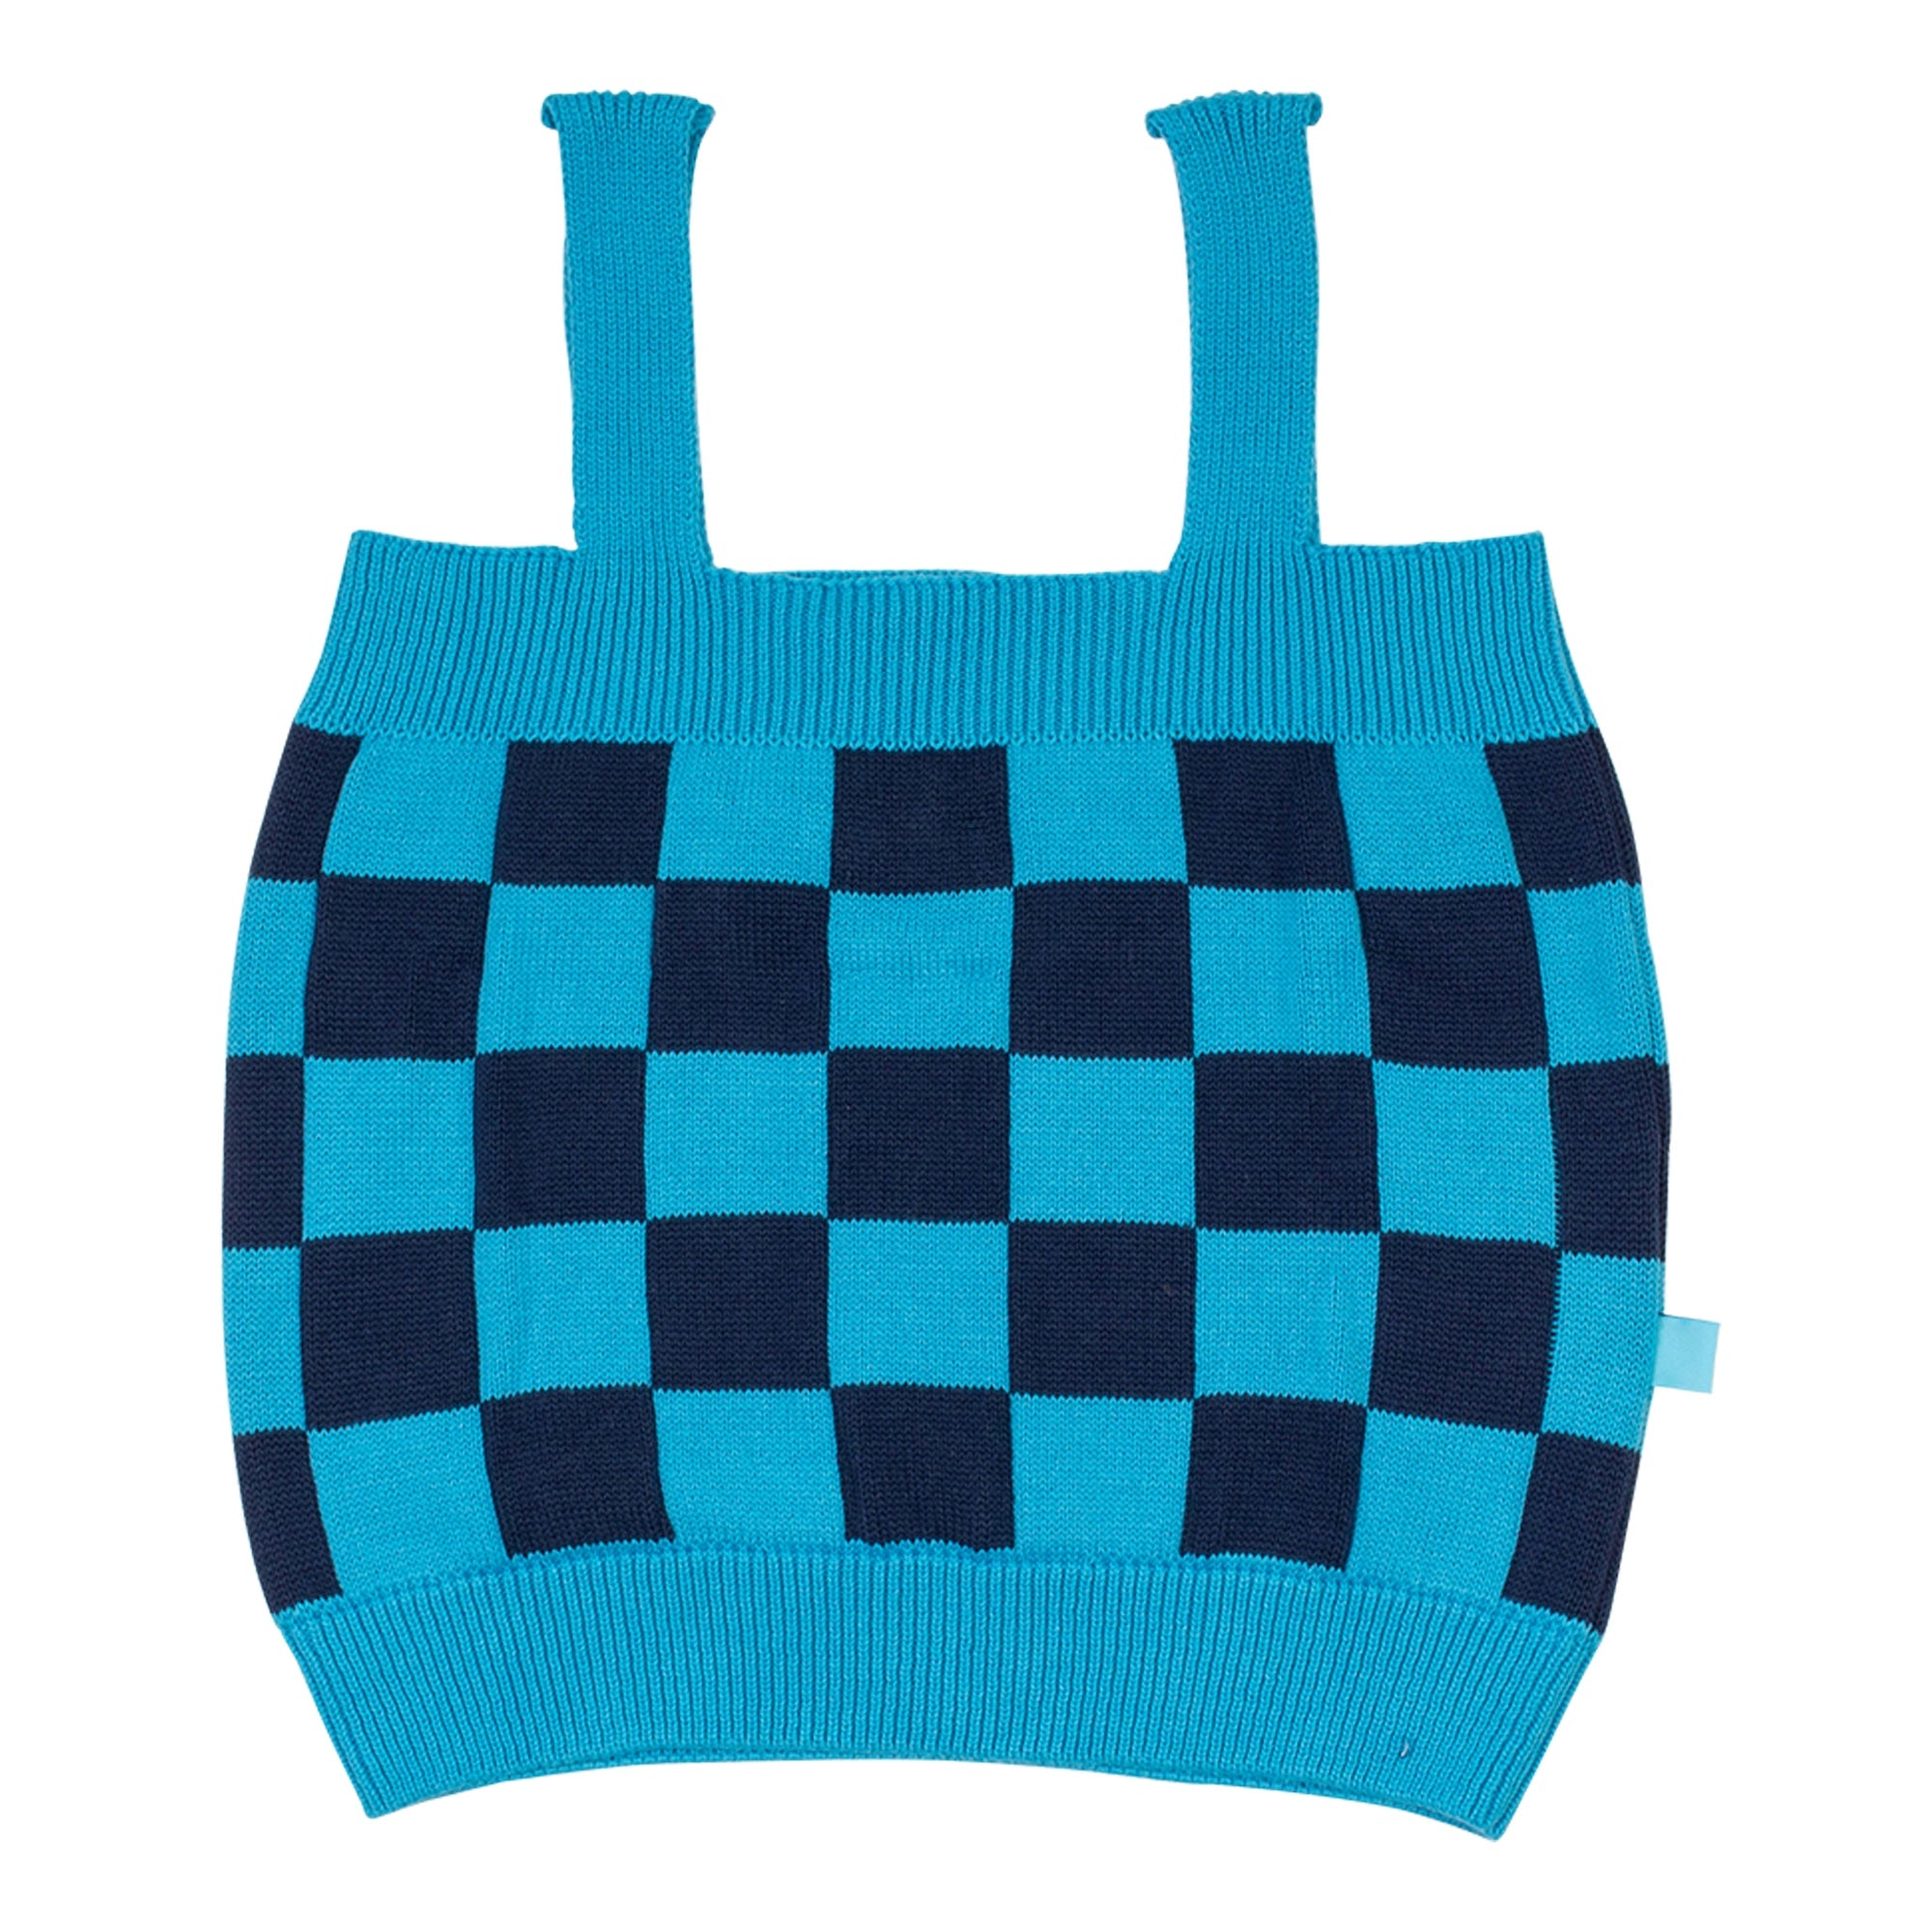 Check Knit Suntop - Turquoise/Navy